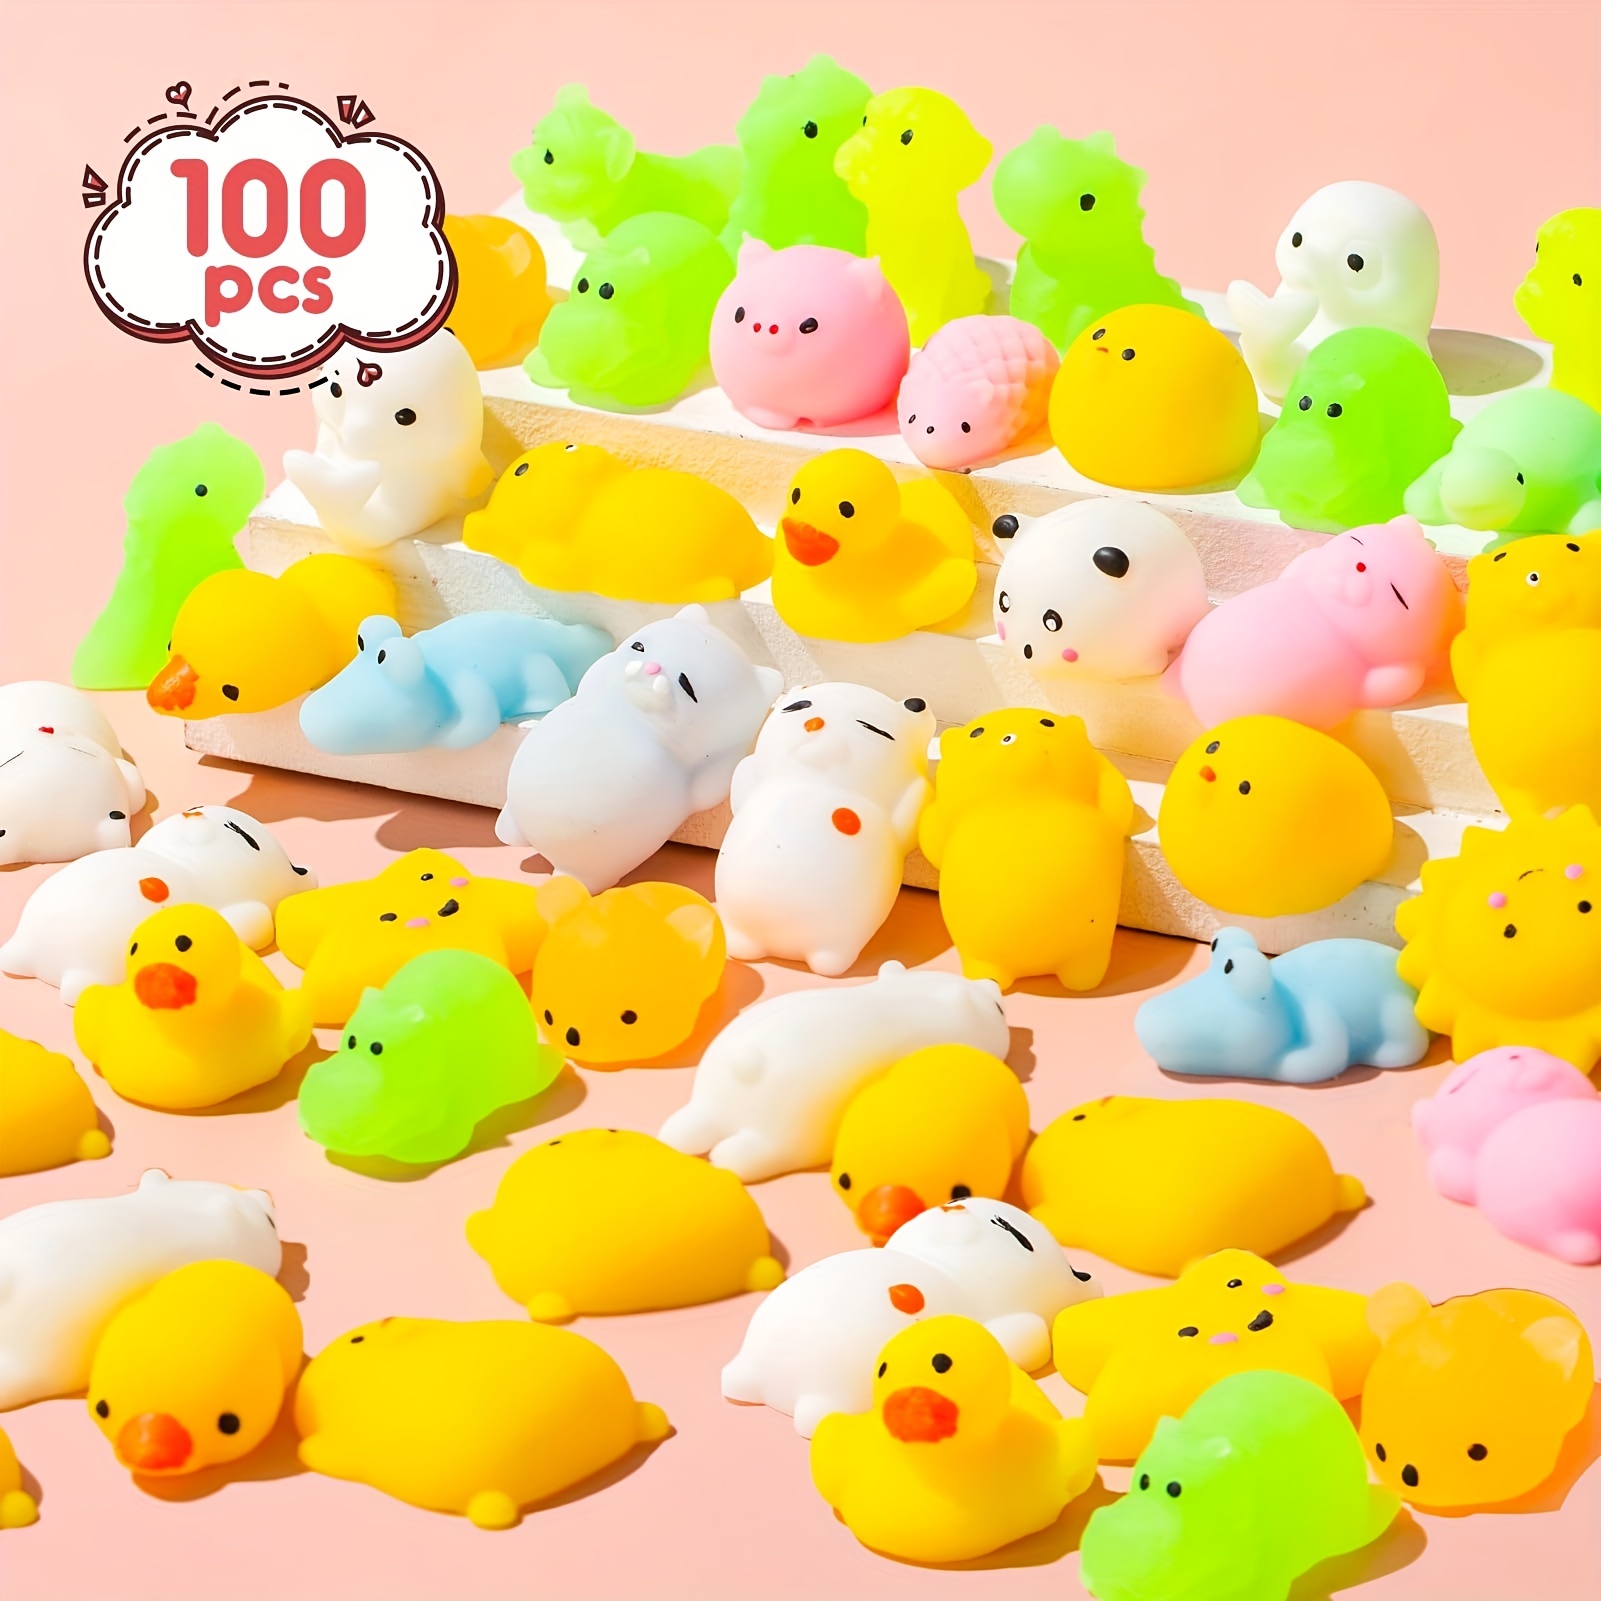 72Pcs Squishies Mochi Squishy Toys - Kawaii Mini Squishy Animals,Cute  Stress Relief Squishy Toy Pack for Boys & Girls, Cool Party Favors,  Classroom Prize, Birthday Gifts with Storage Box